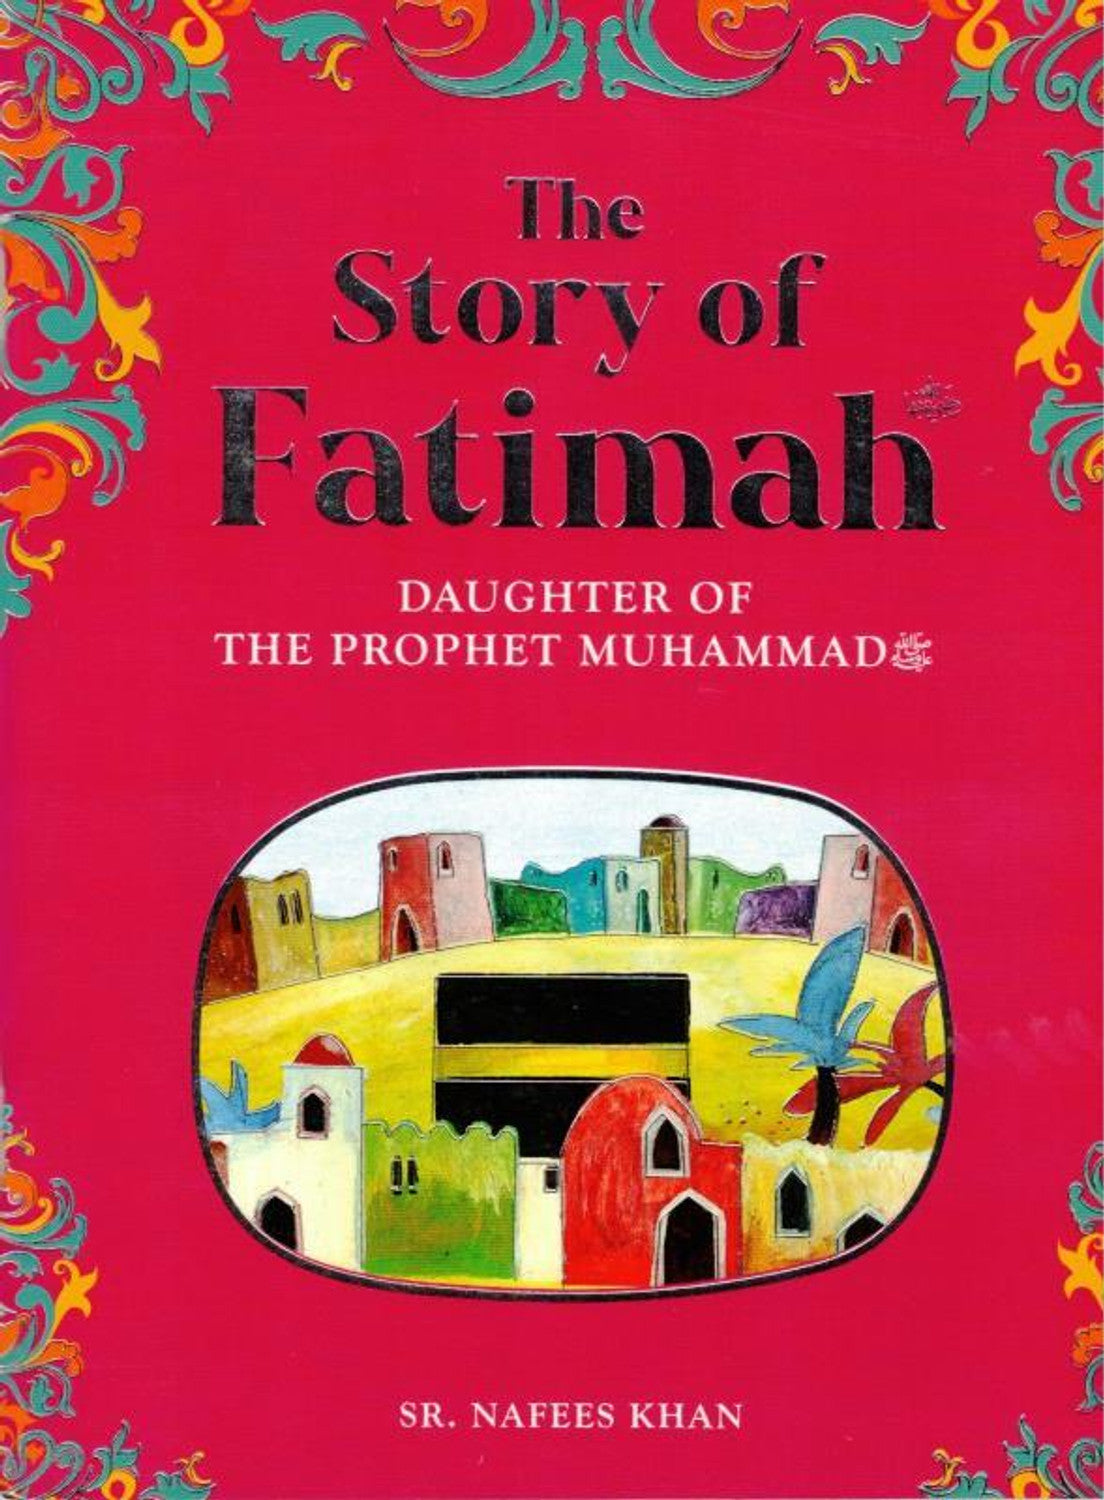 The Story of Fatimah, Daughter of the Prophet Muhammad (saw)